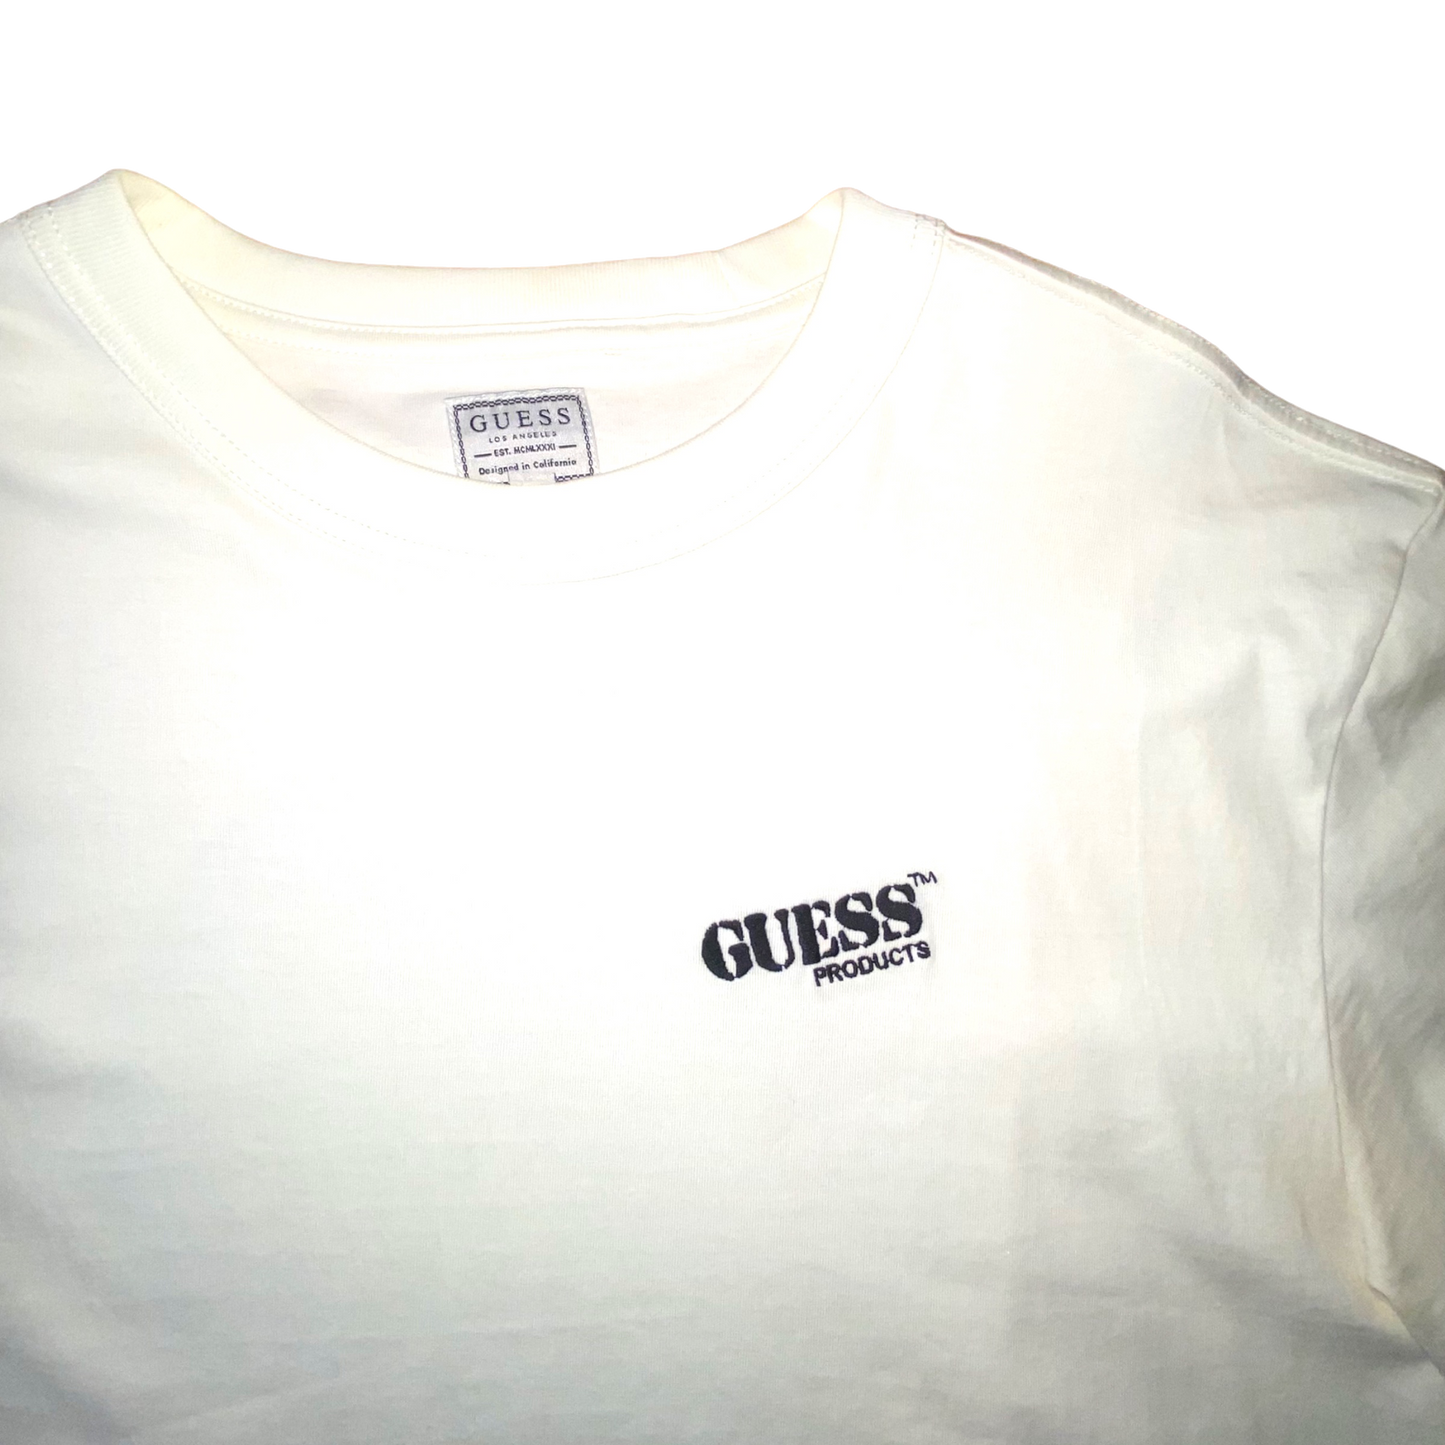 Guess Los Angeles - Guess Products Vintage Graphic T-Shirt